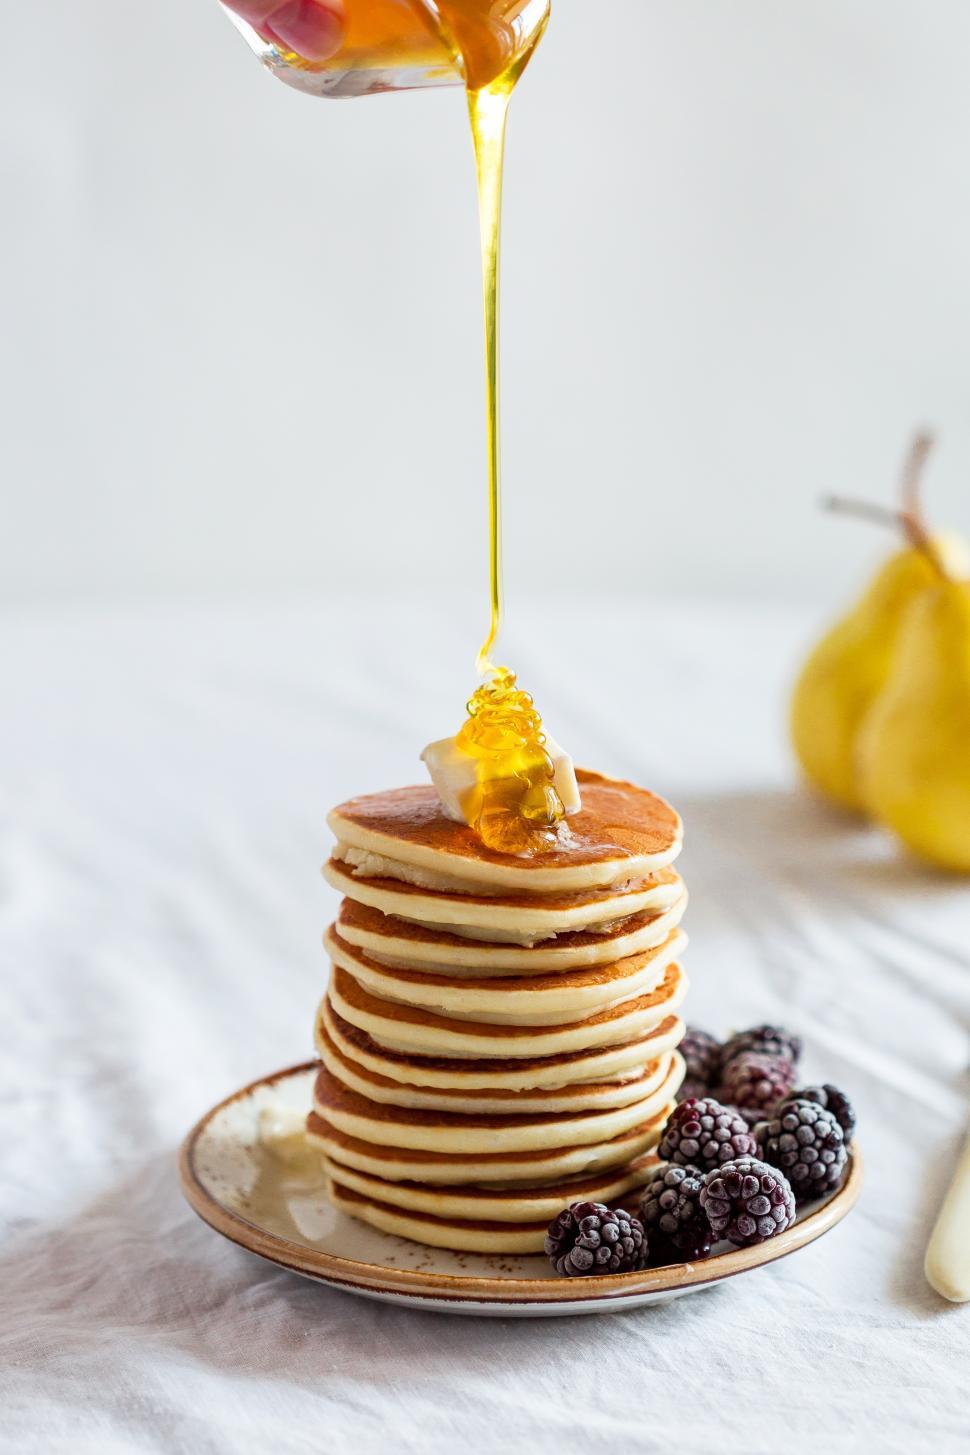 Free Image of Honey being poured on pancakes 